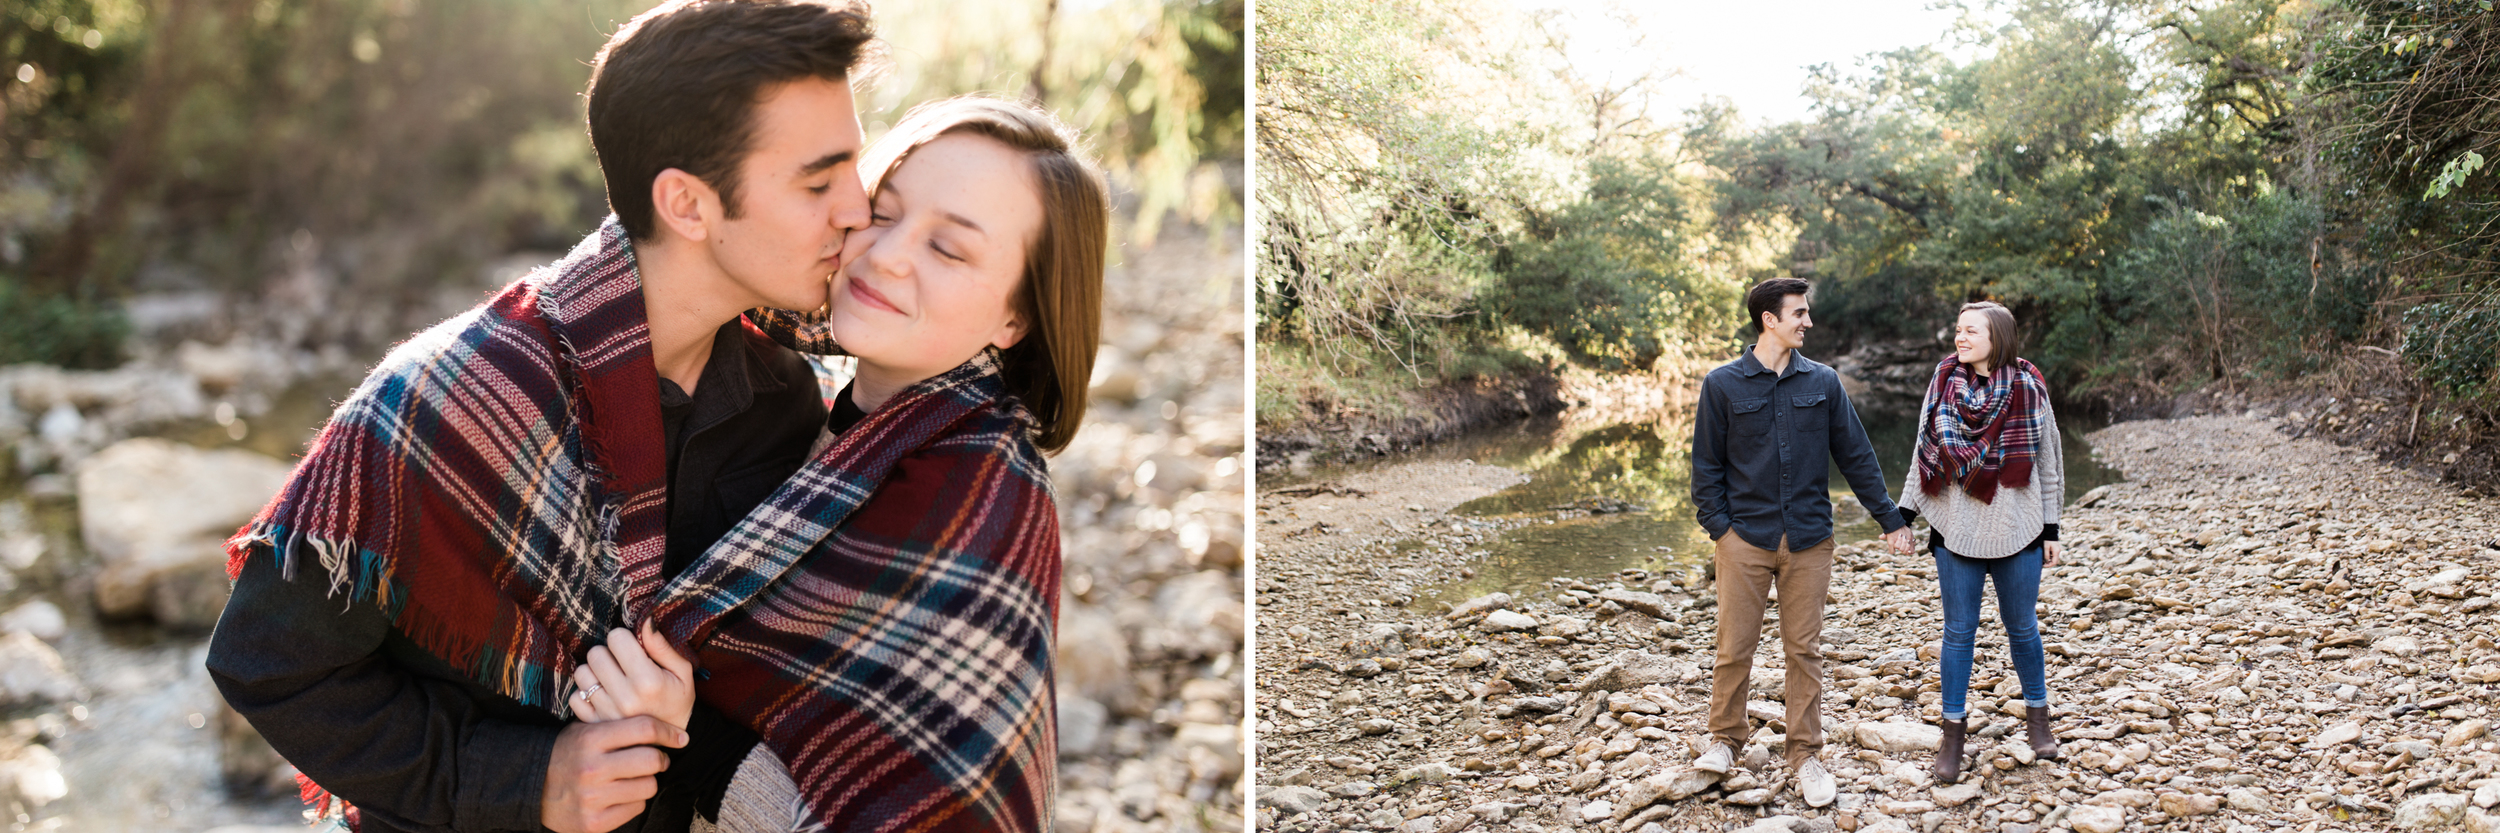 austin, texas hill country wedding engagement couple outdoor adventure photography